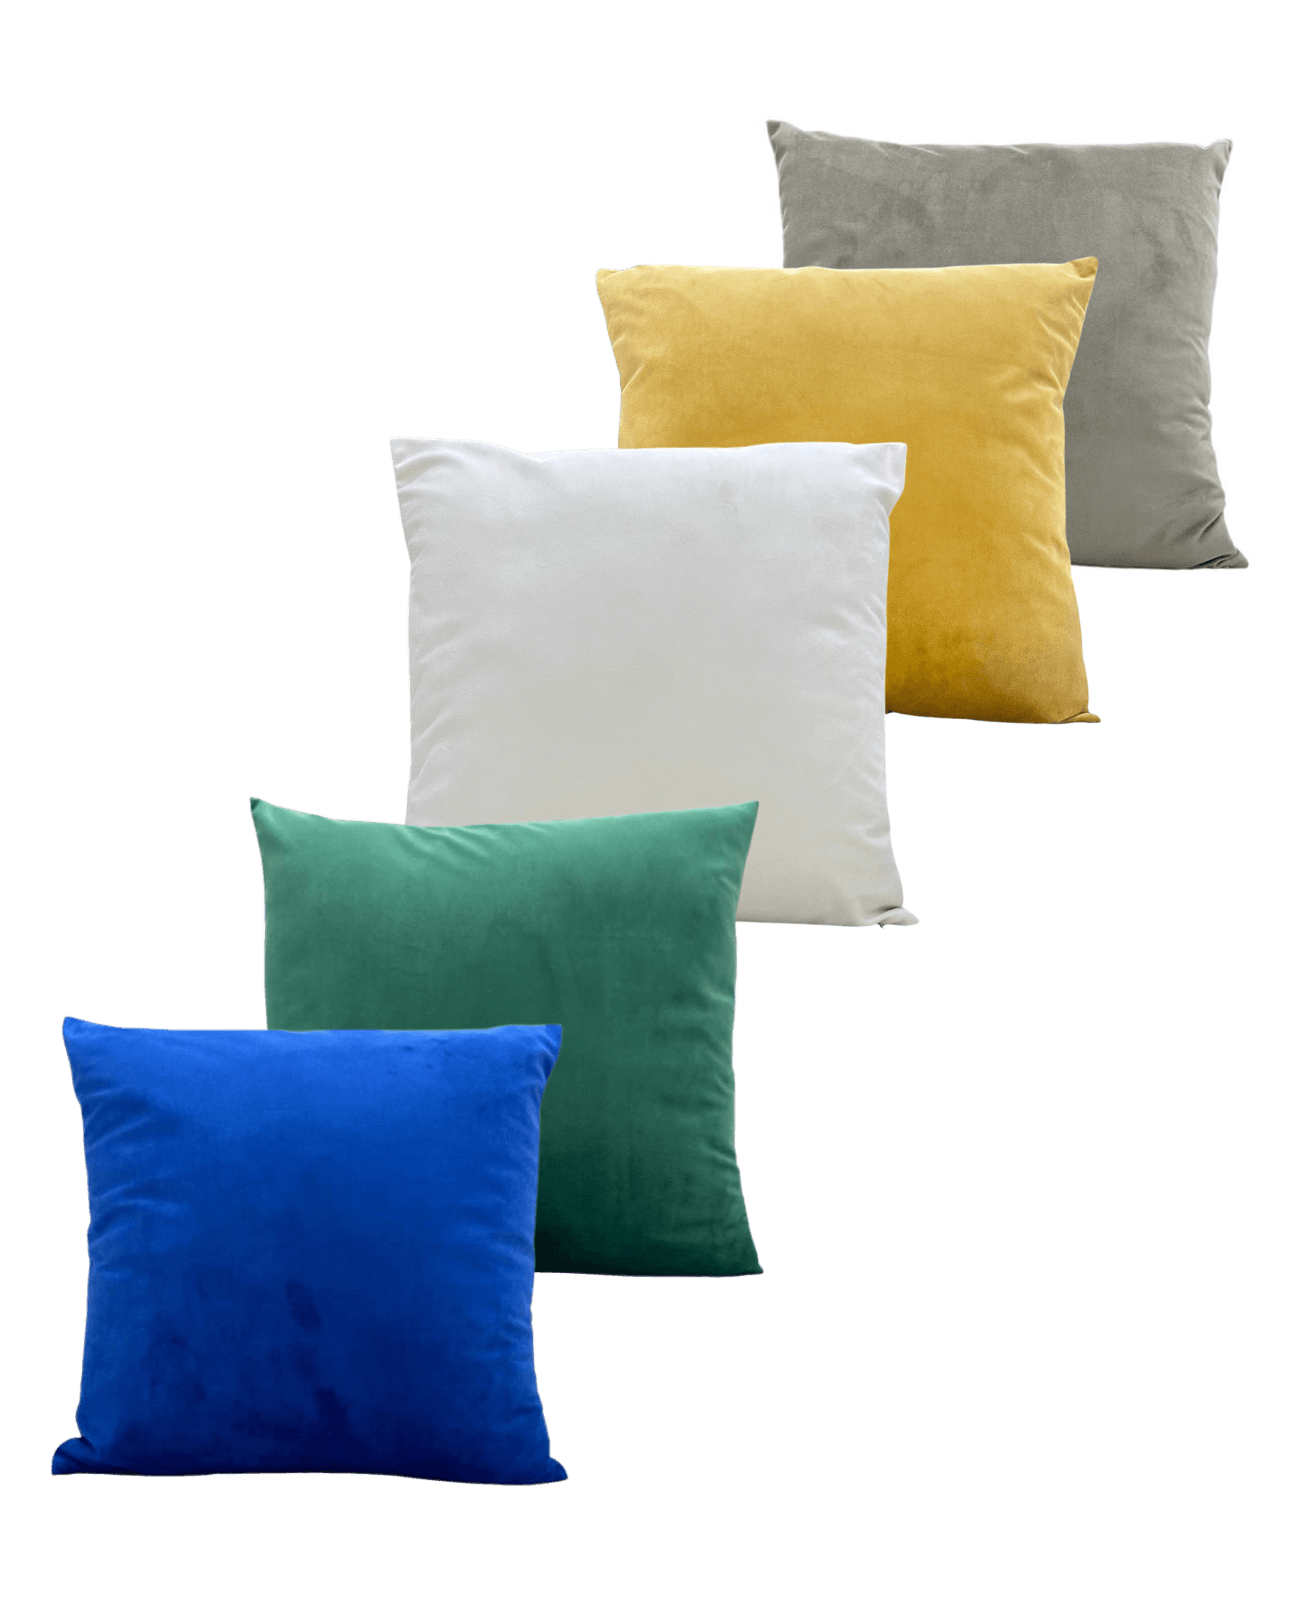 Velvet Cushion, a comfortable and eco-friendly throw pillow for any occasion. Available in various designs, colors, and sizes. Sold individually.